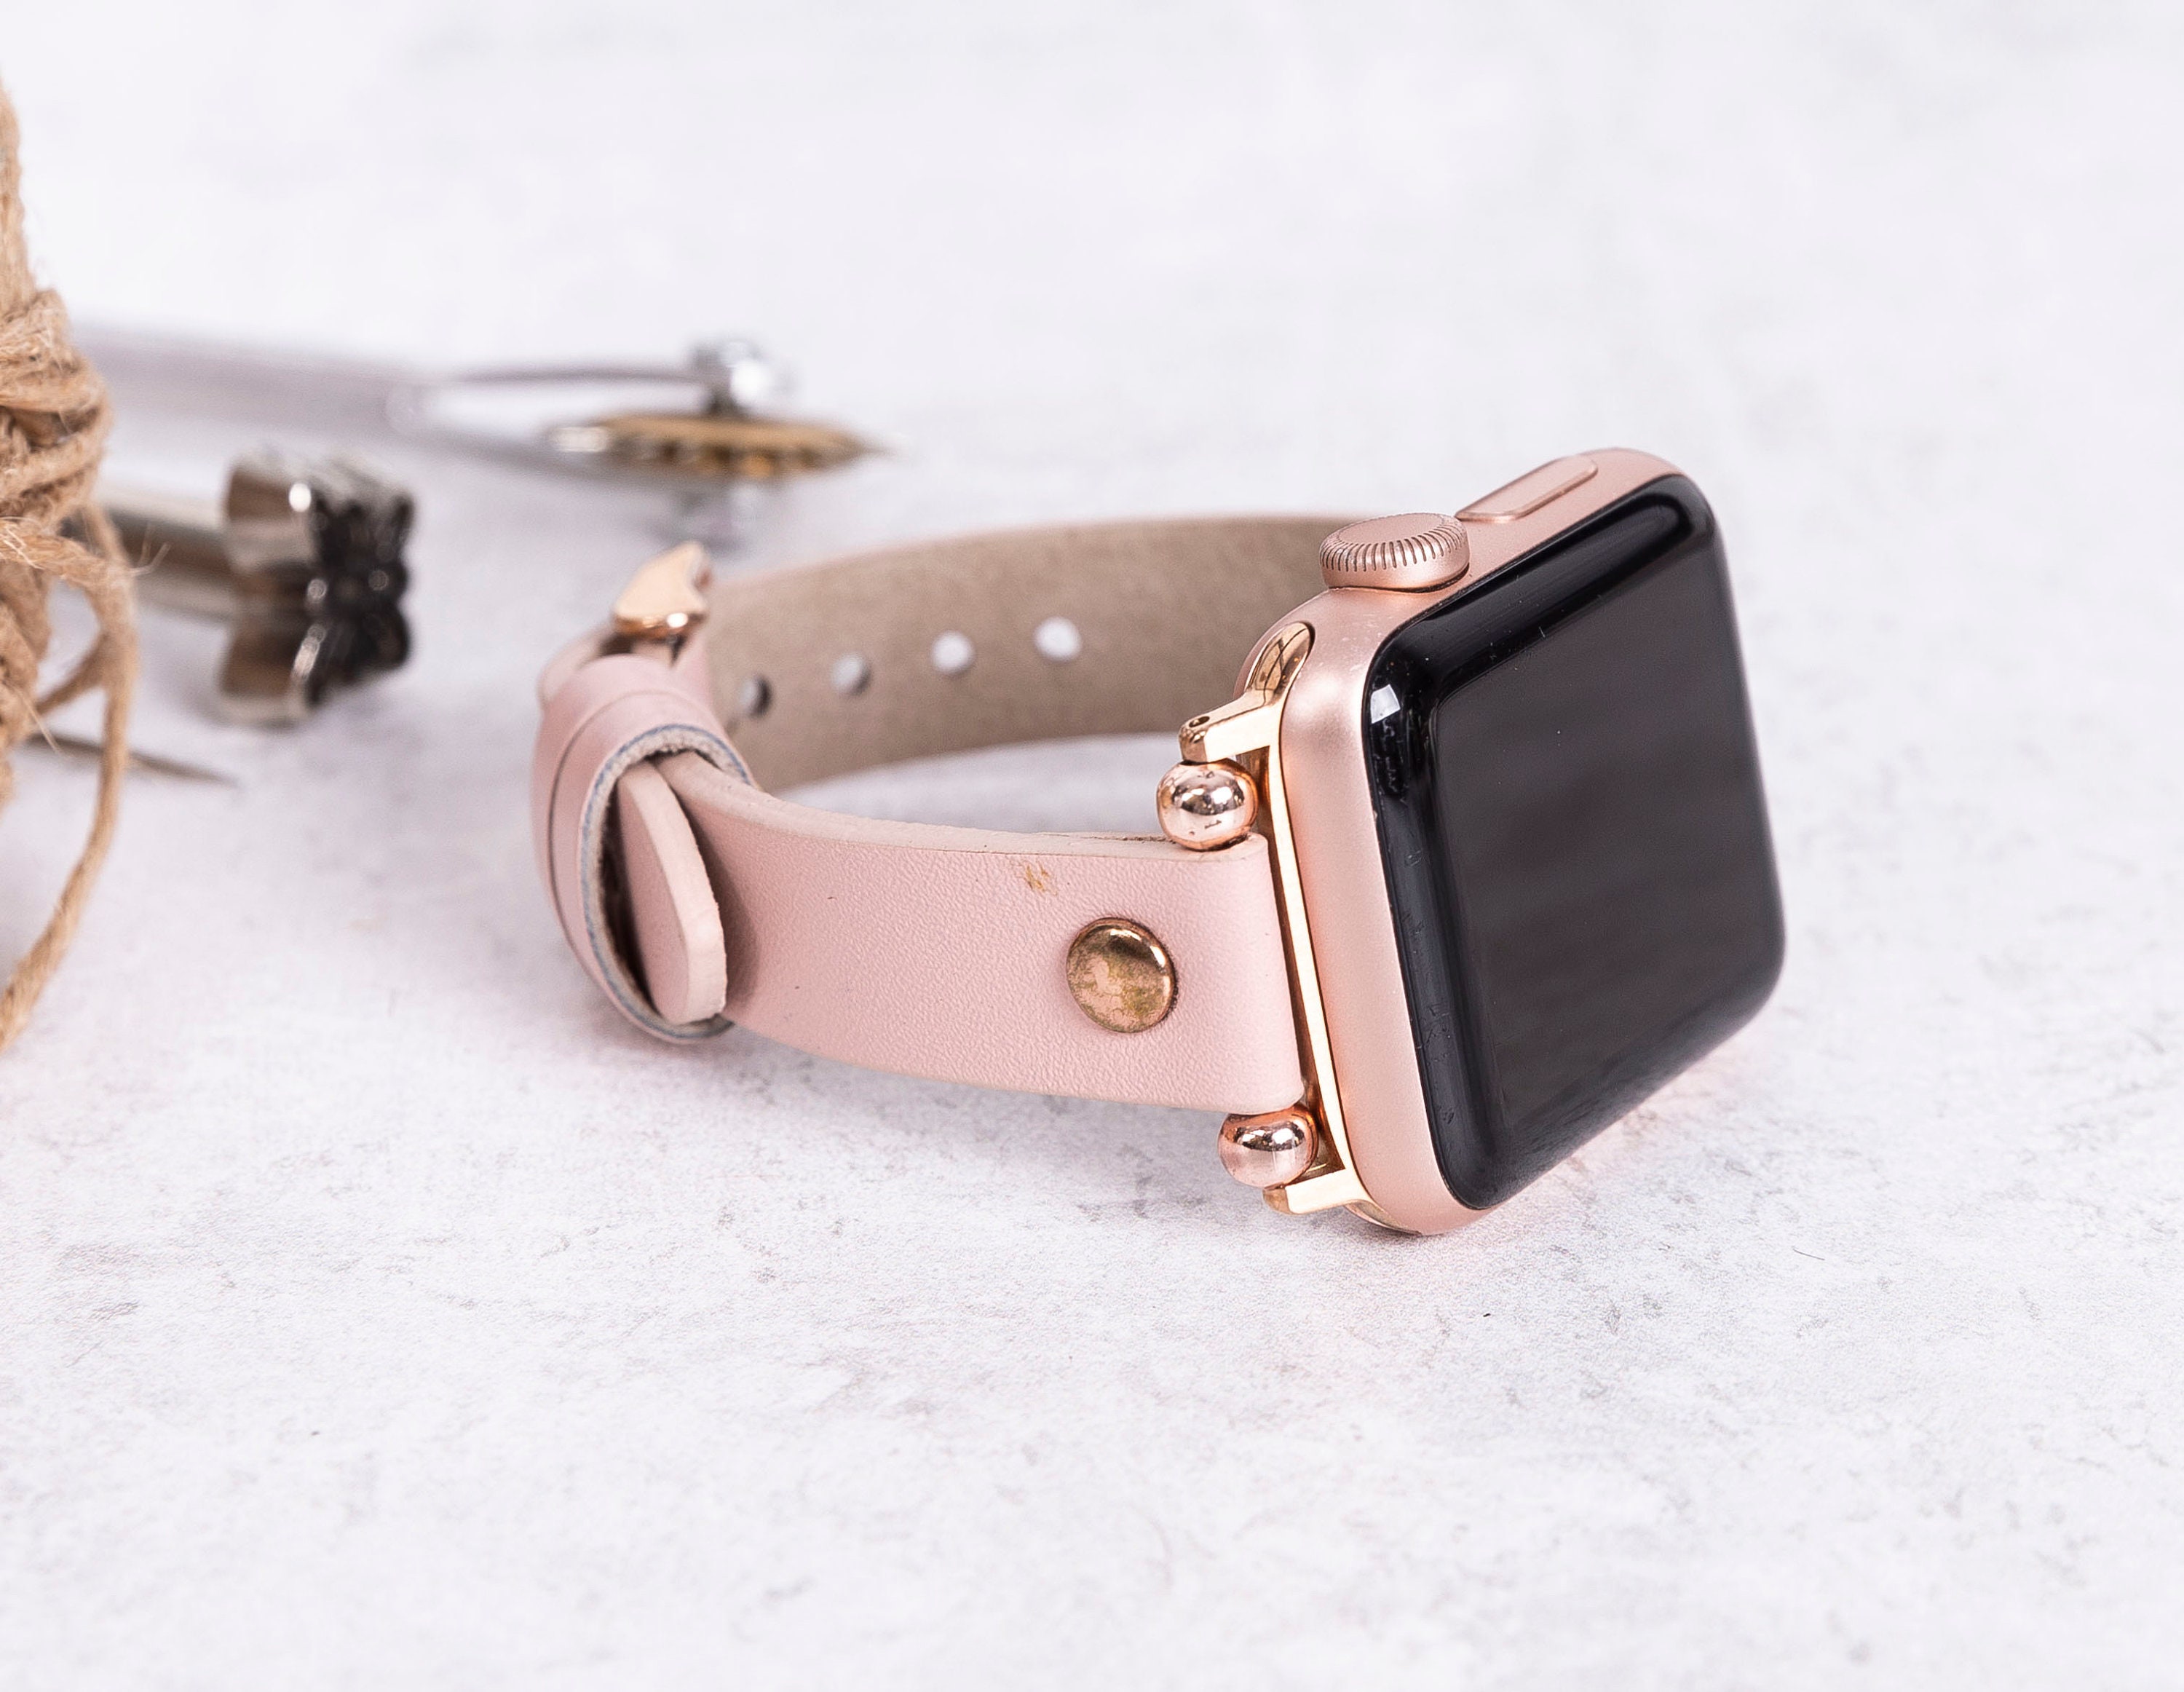 Leatherian Handcrafted Apple Watch Band